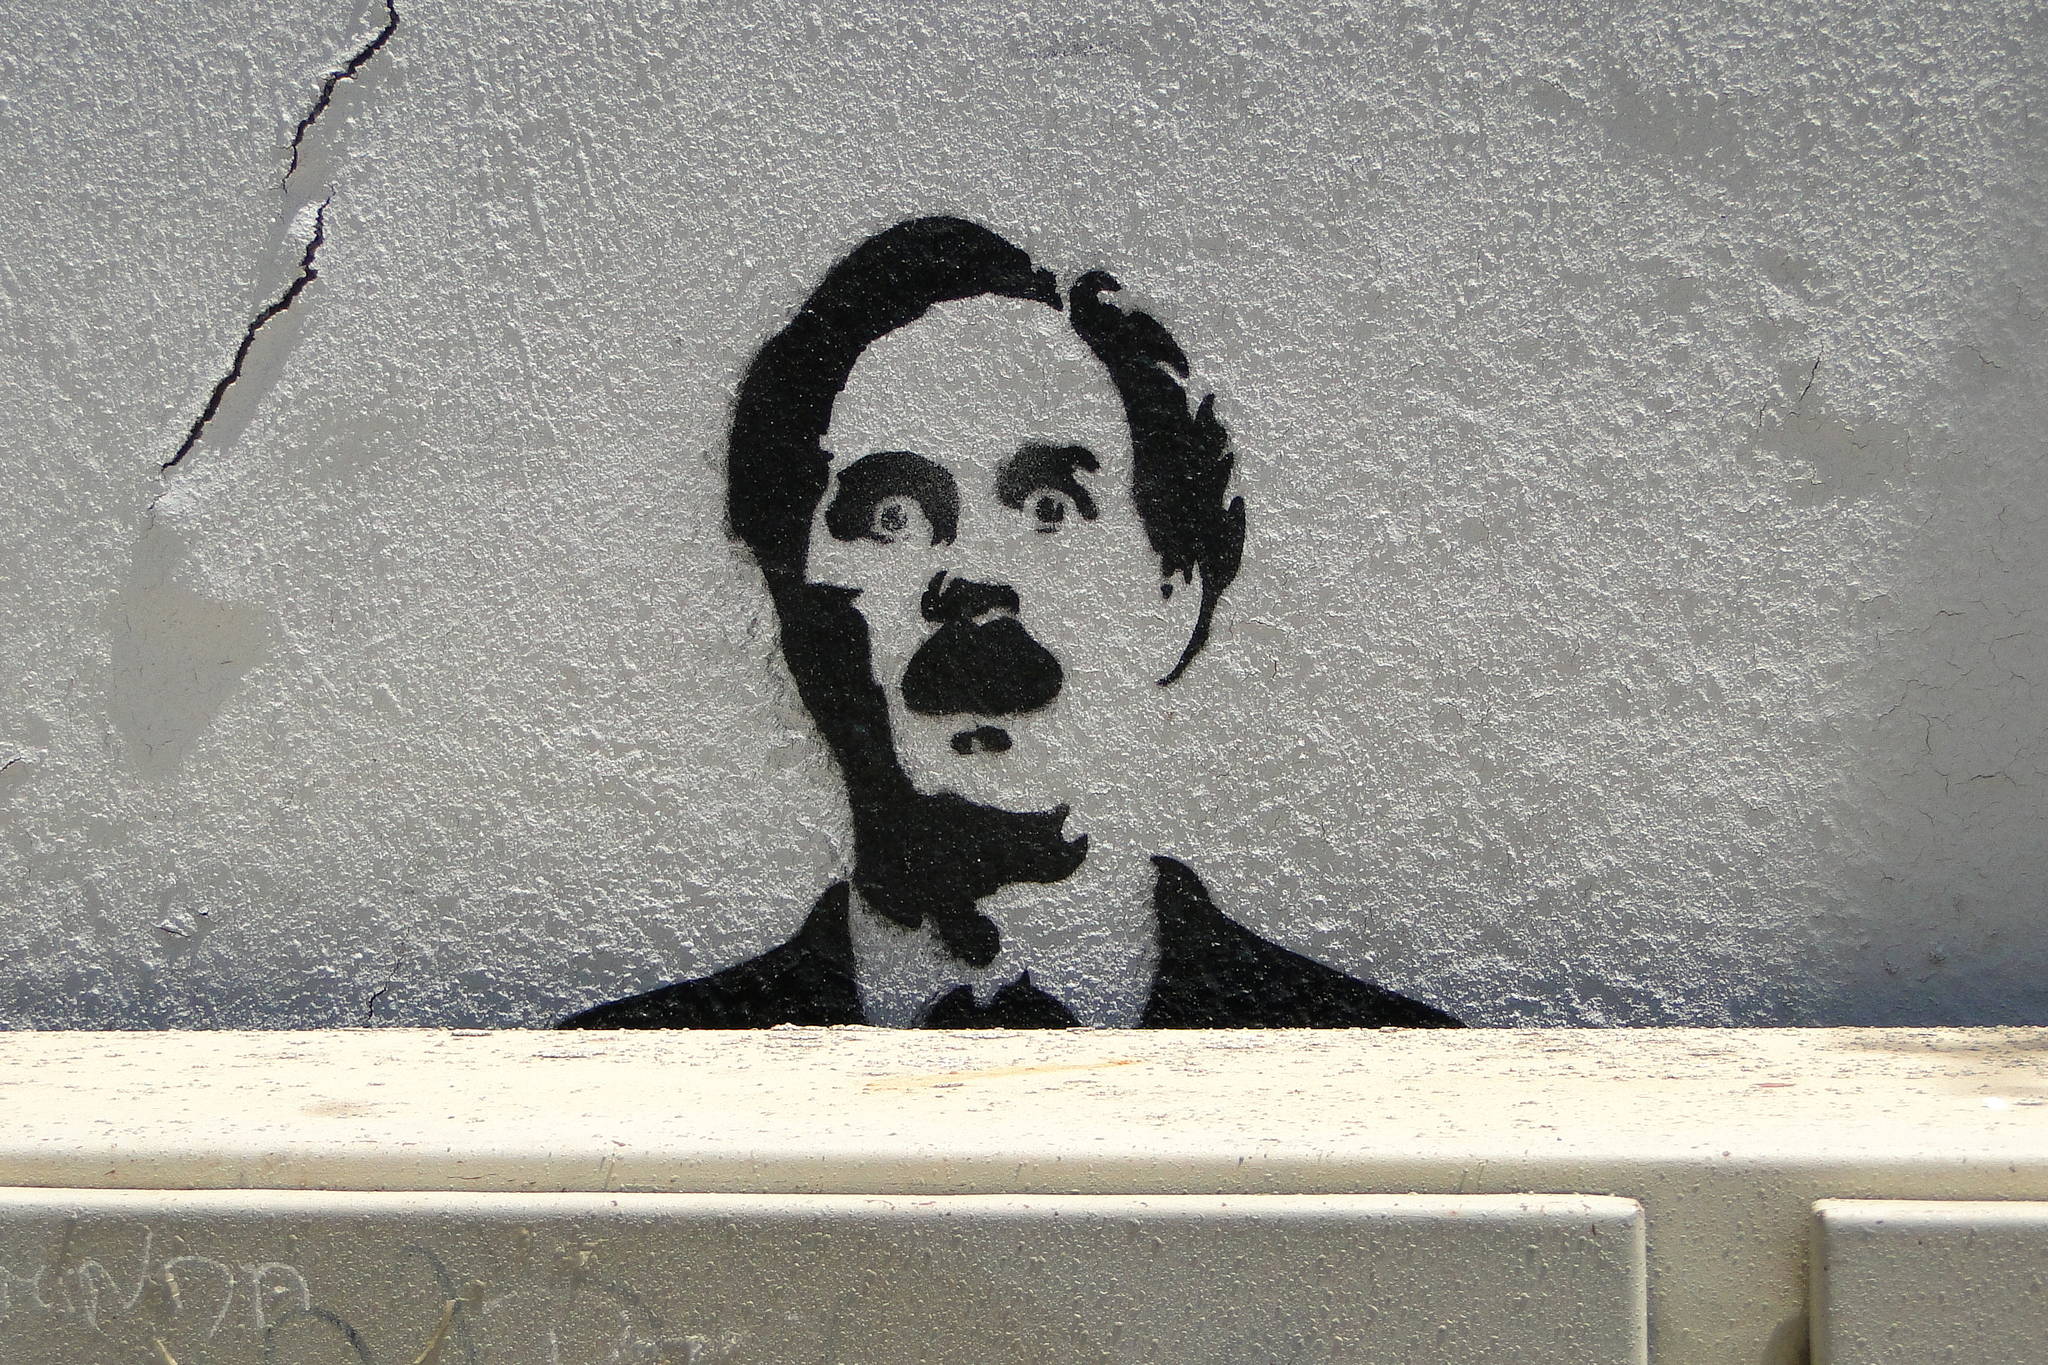 When your face gets stenciled on a wall in Lisbon, you know you’ve made it: John Cleese, in a &lt;em&gt;Fawlty Towers&lt;/em&gt; image. Photo via Wikimedia Commons